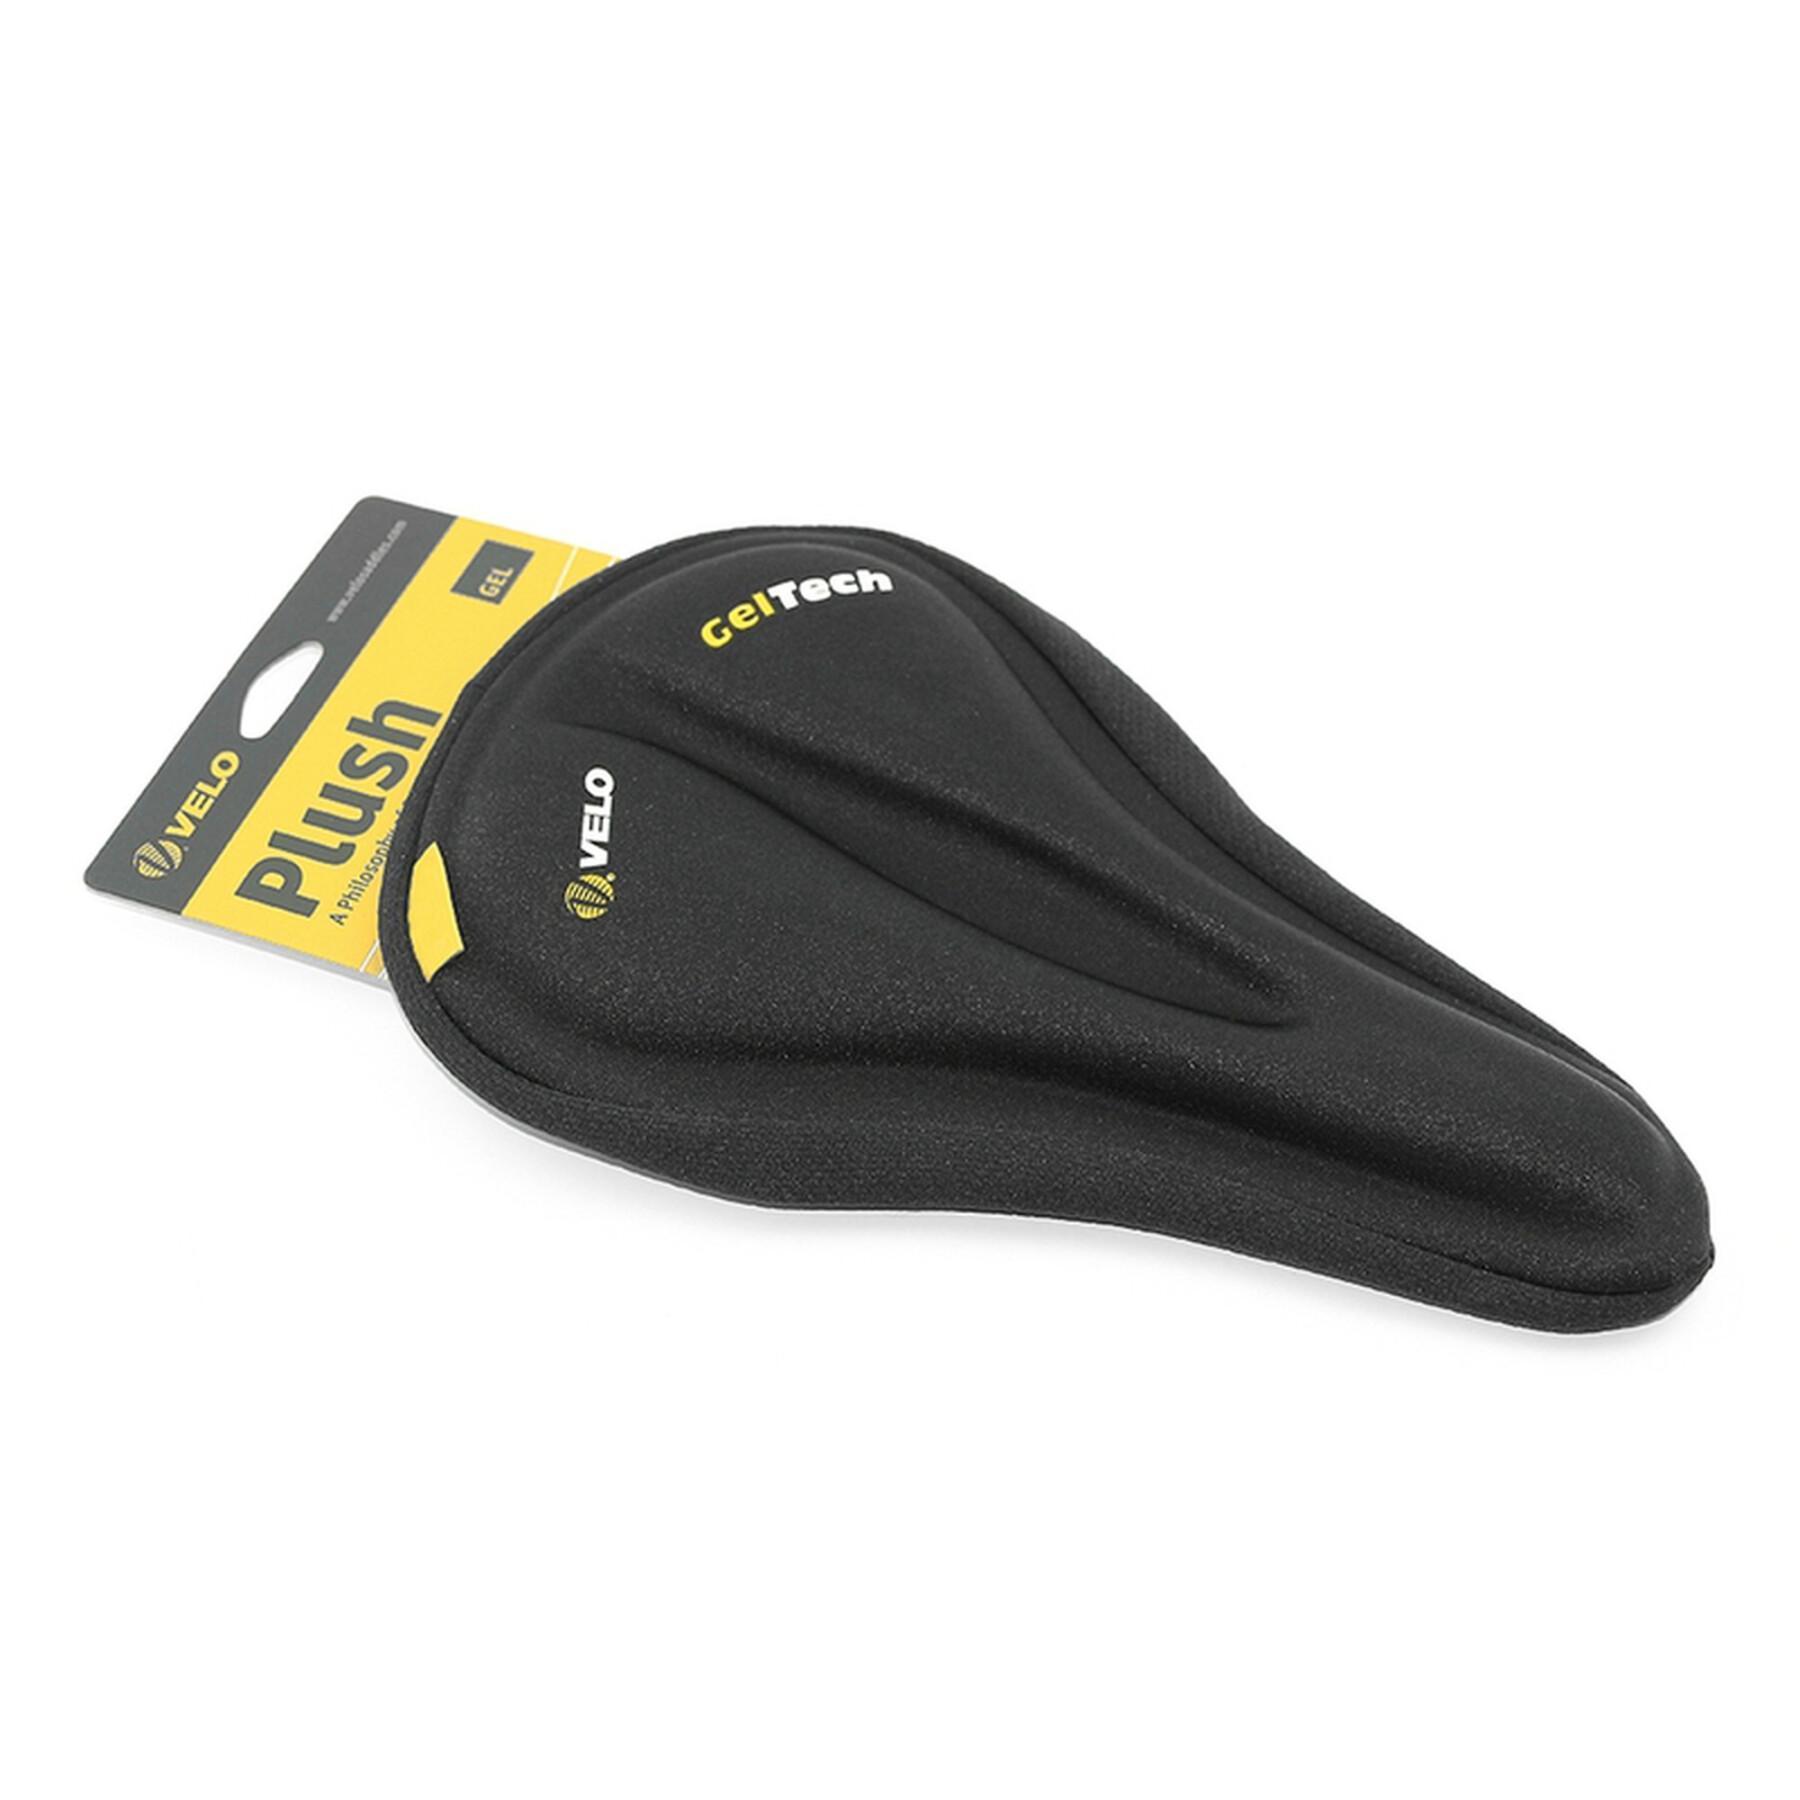 Saddle cover - small size VELO GEL Tech